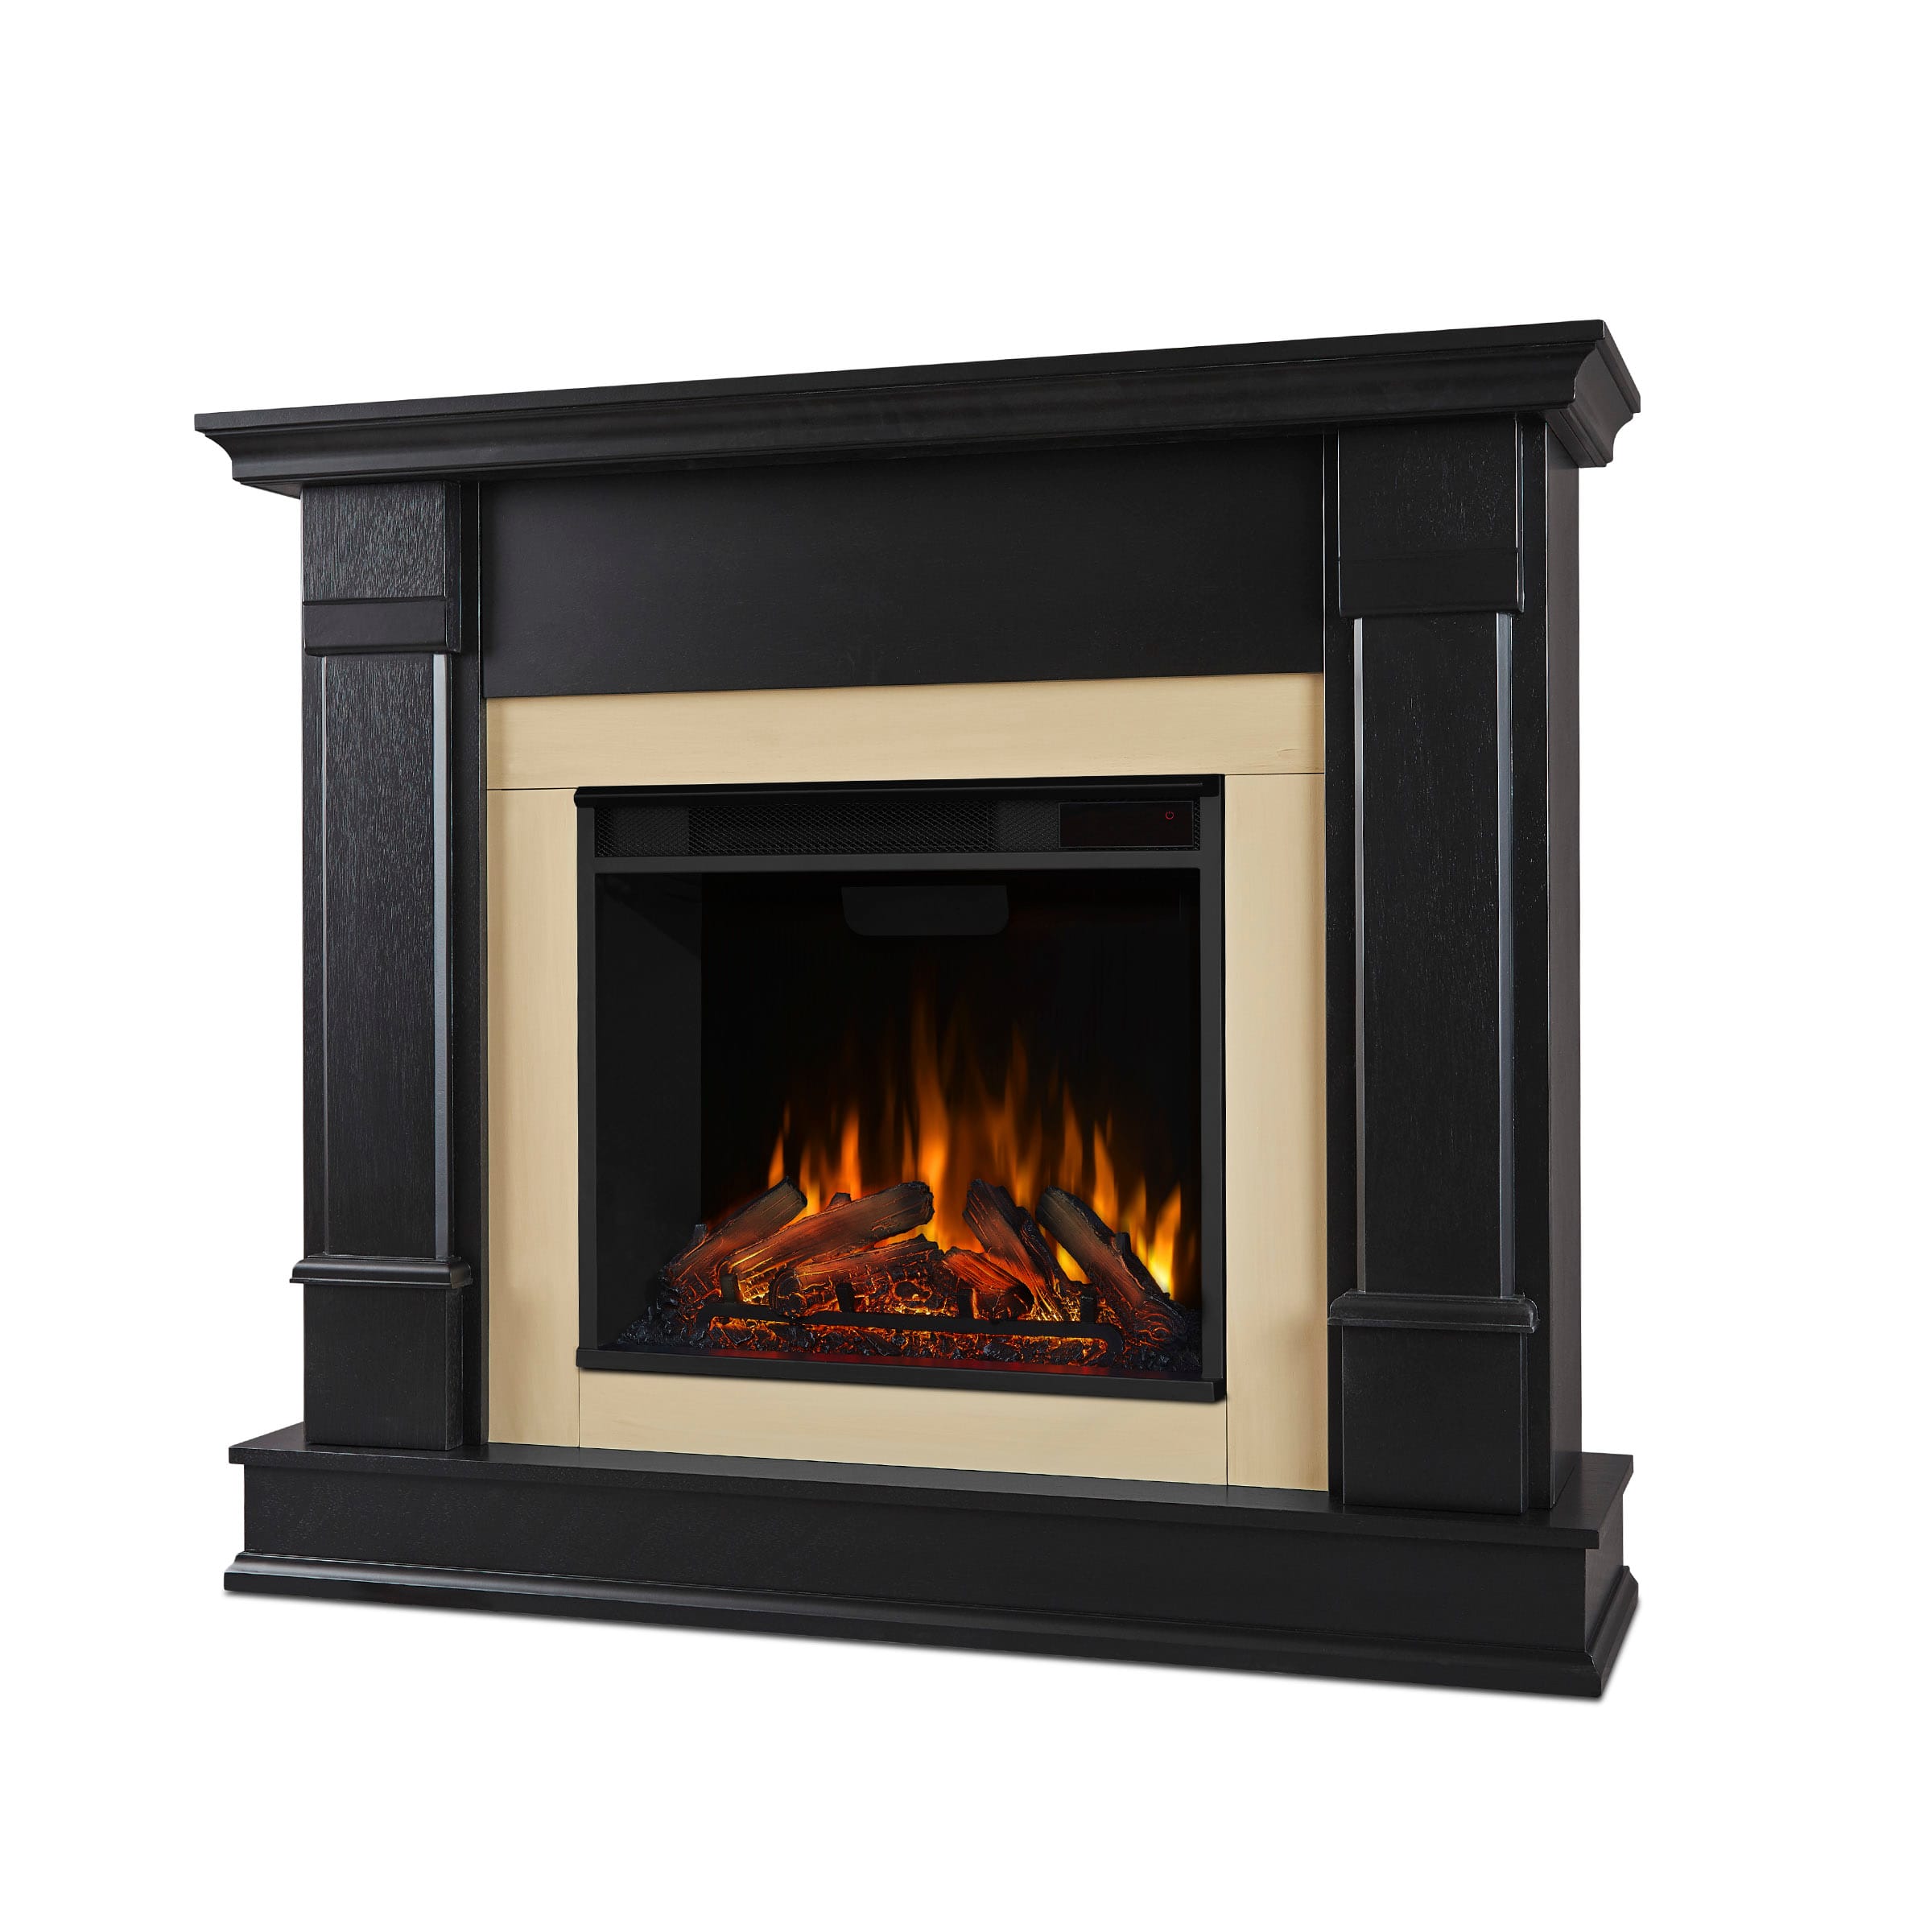 Real Flame Silverton Electric Fireplace, Does Electric Fireplace Have Real Flame